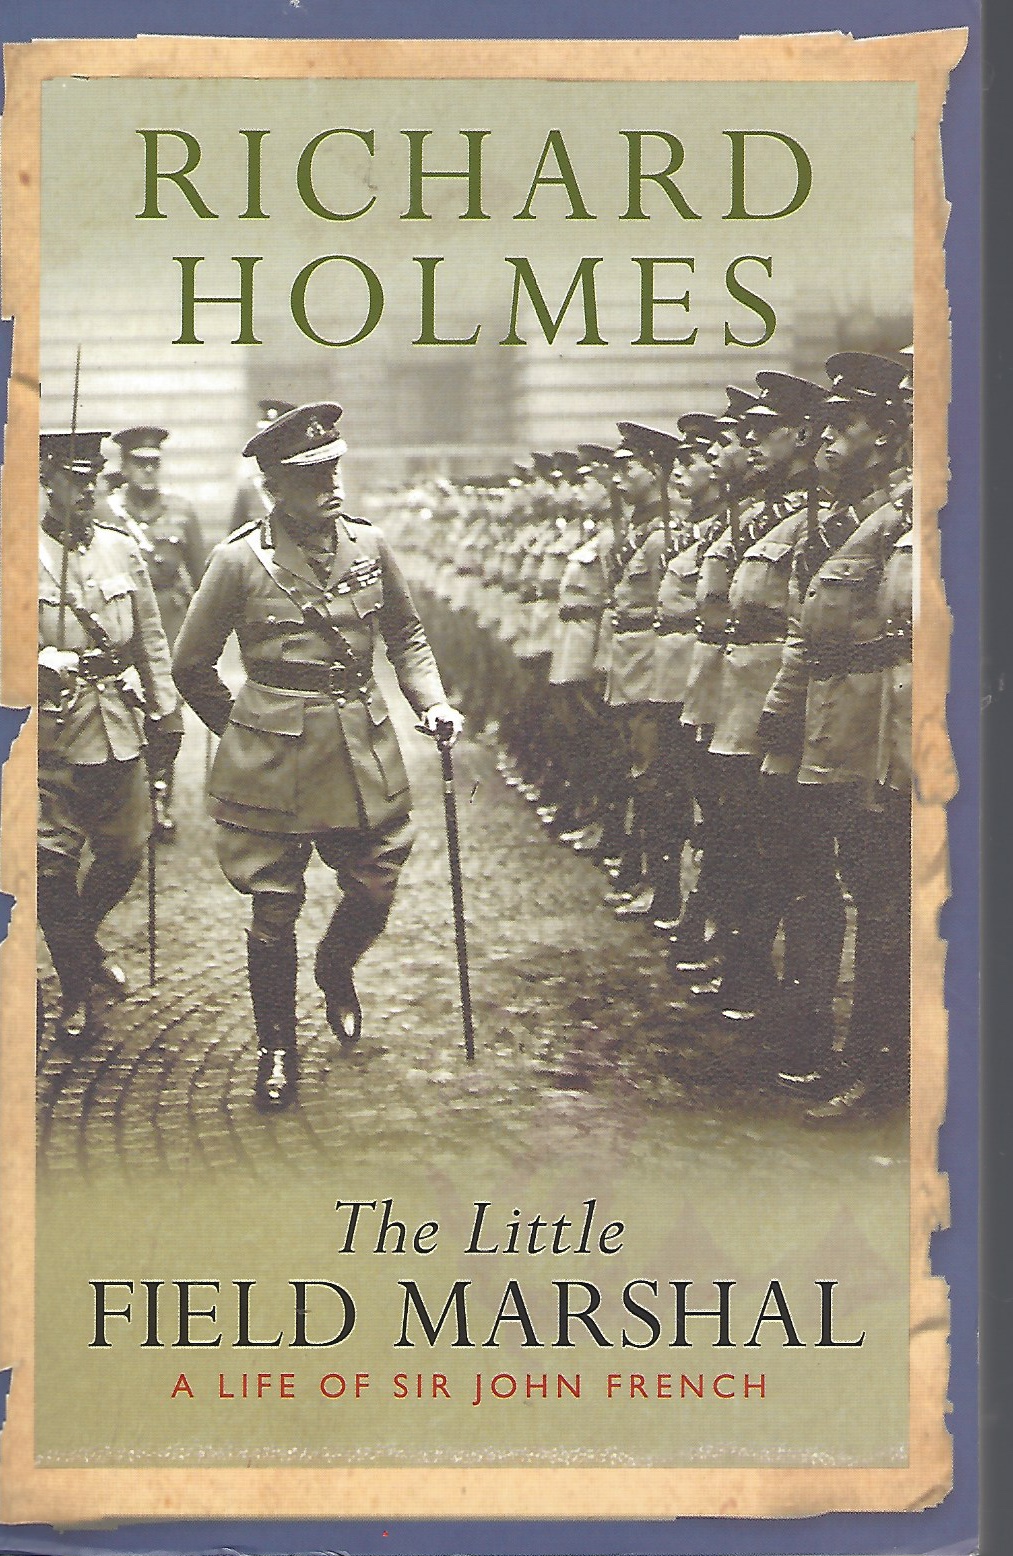 HOLMES, RICHARD - Little Field Marshal, the a Life of Sir John French